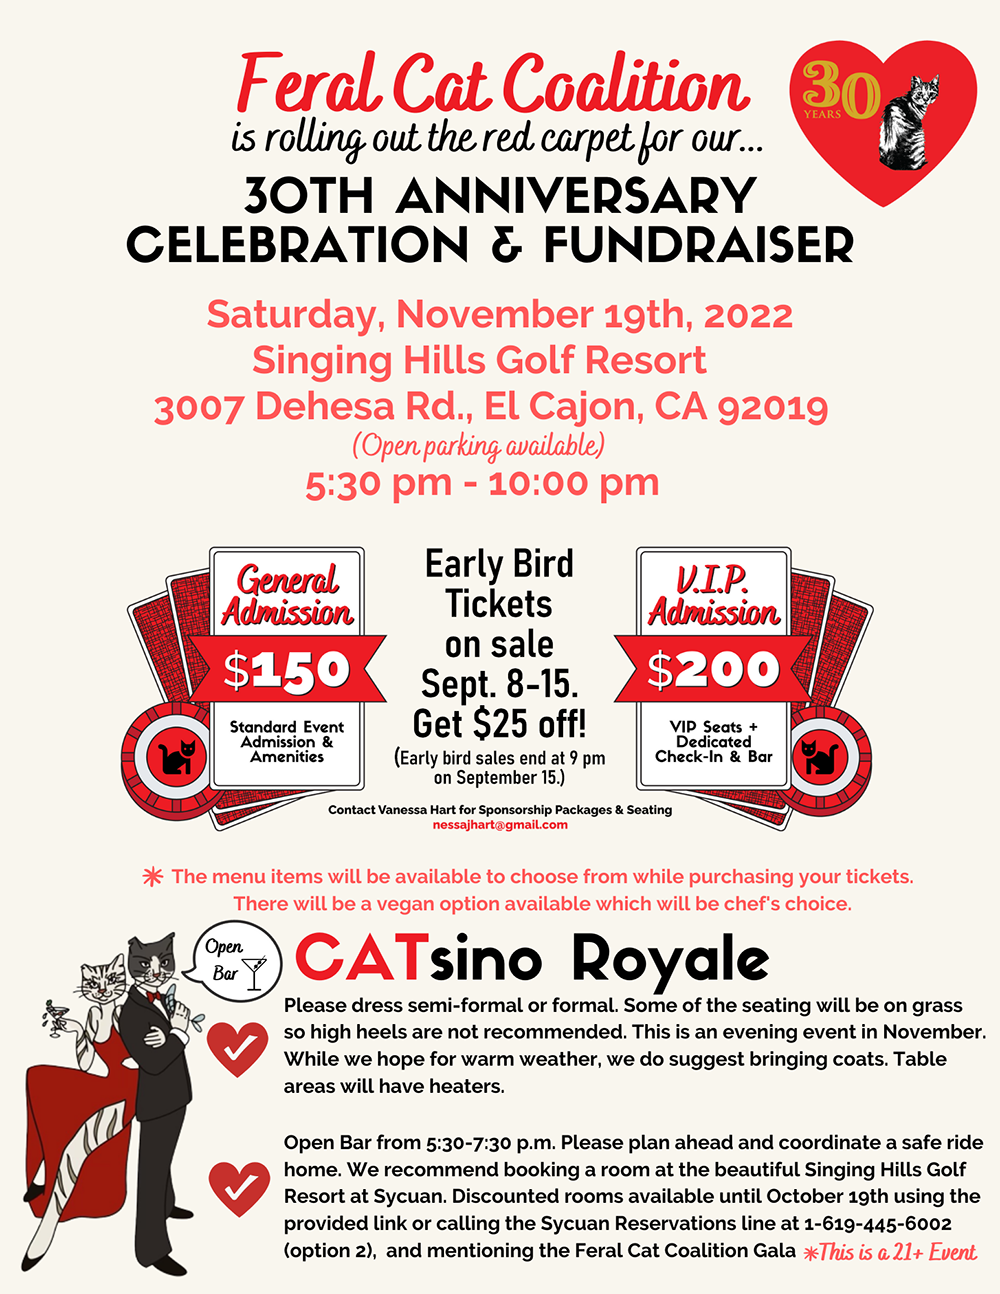 Feral Cat Coalition 30th Anniversary Celebration and Fundraiser - Early Bird Tickets go on sale Sept. 8-15!